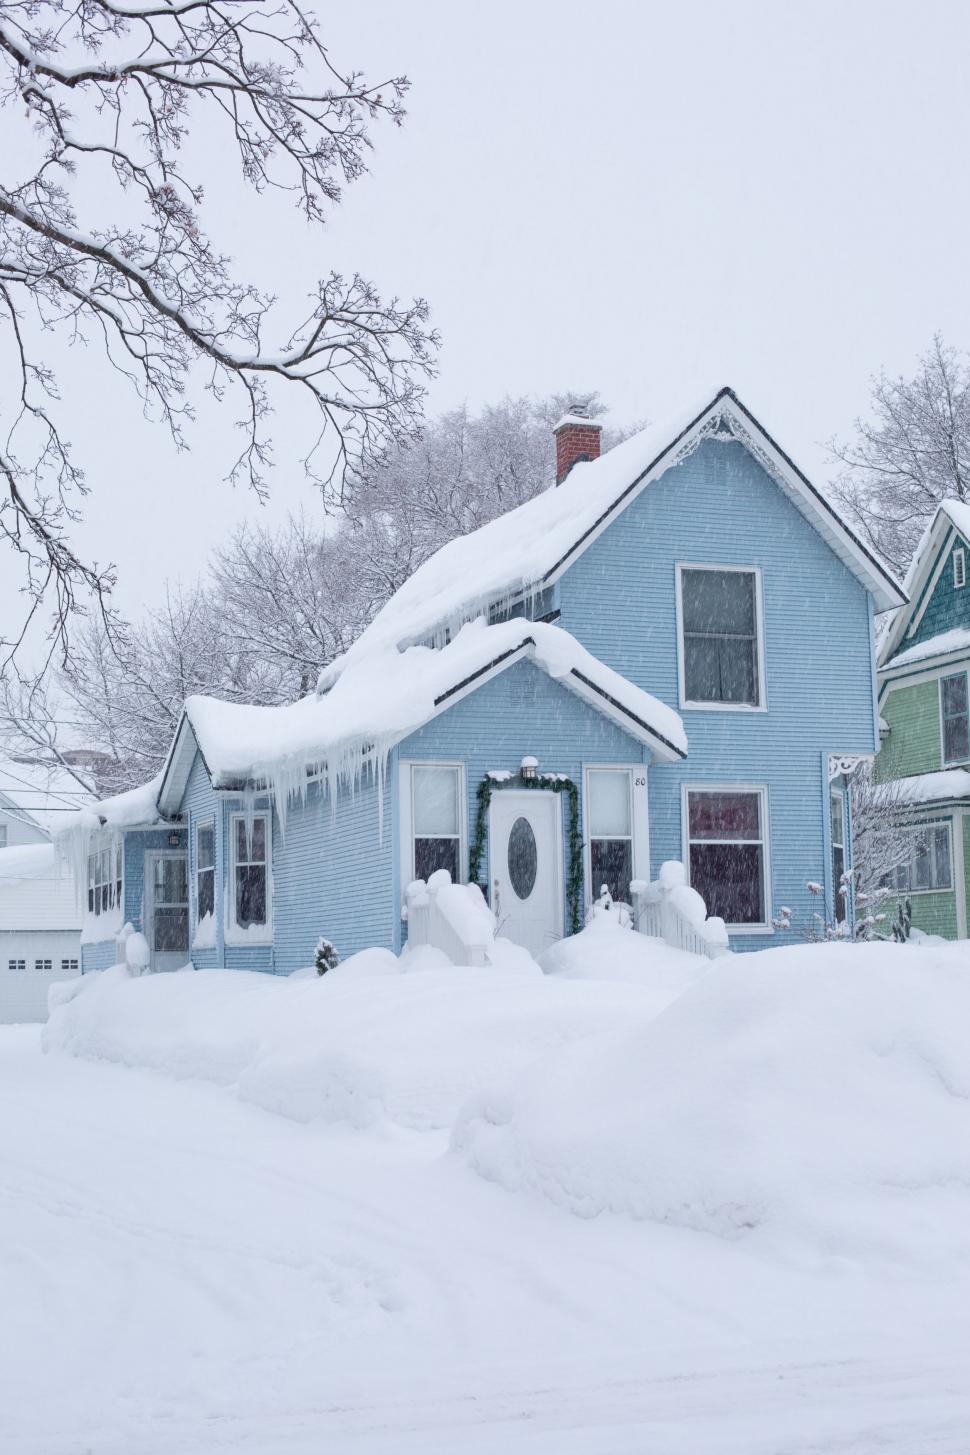 Free Image of Houses in Snow 